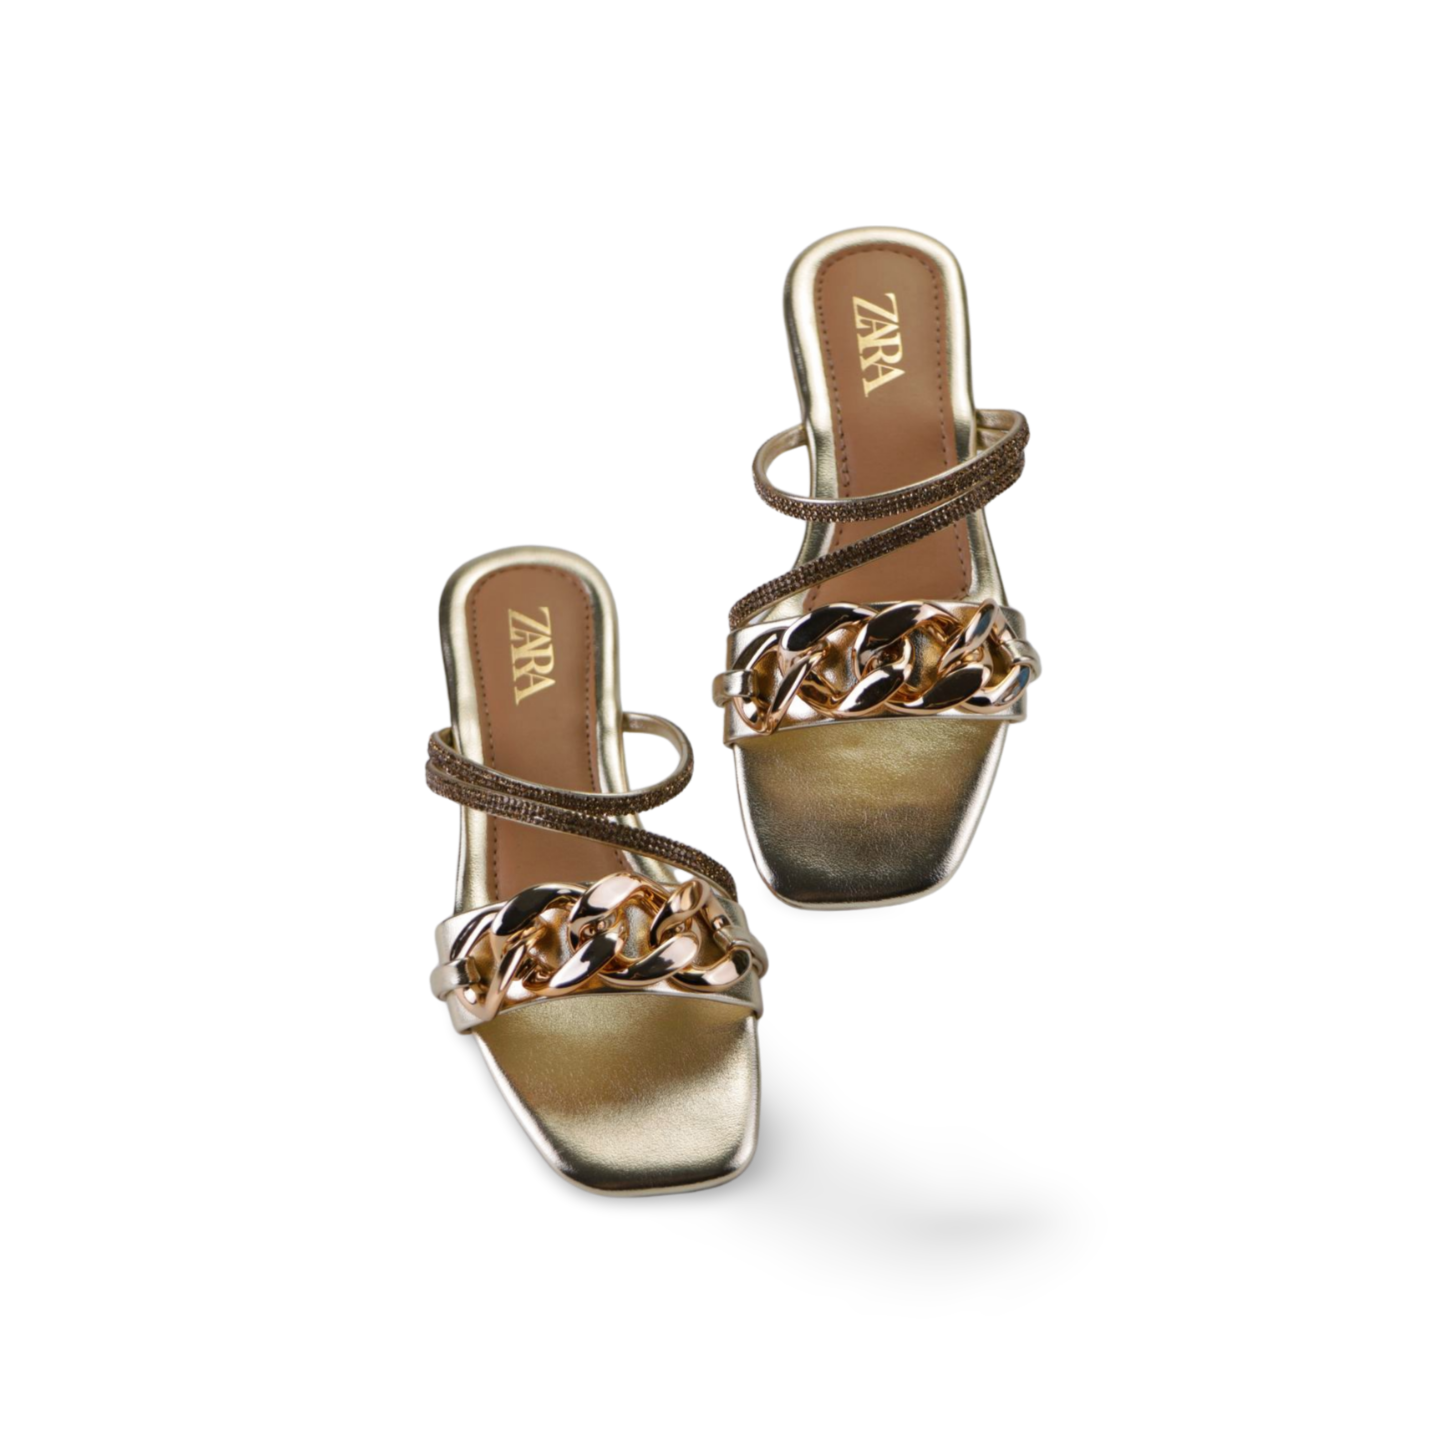 Sparkling Statement Sandals: Flat Heels with Gold Chains and Rhinestones